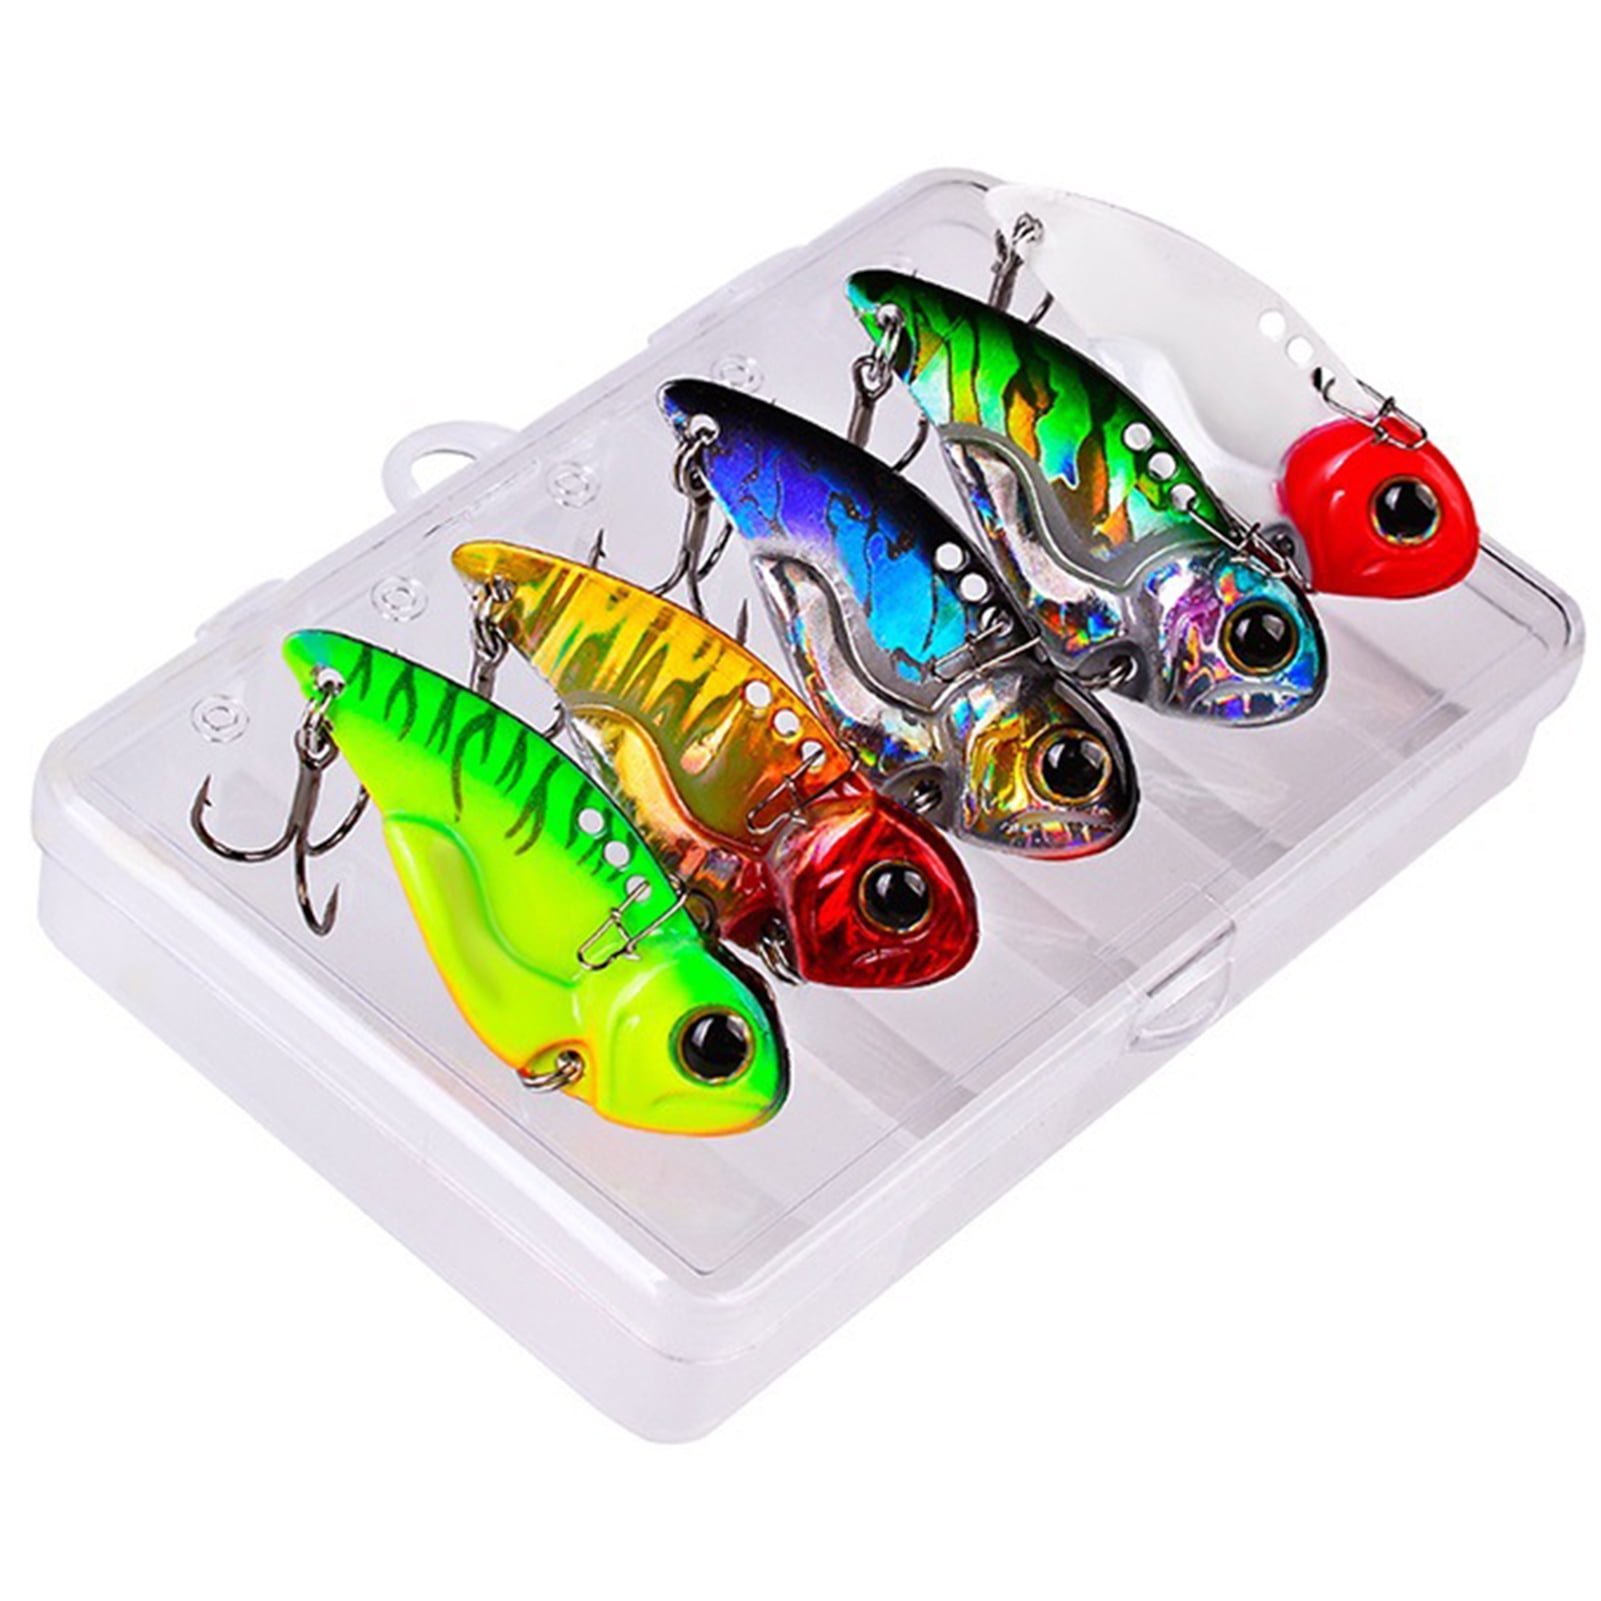 5 Pcs 7CM Crankbait Tackle Tiddler Bait Bass Trout Shad Tackle Spinner Sea Fluke Saltwater Bream Fishing Plug Tuna Lure Saltwater Popper Surf Fishing Lure 